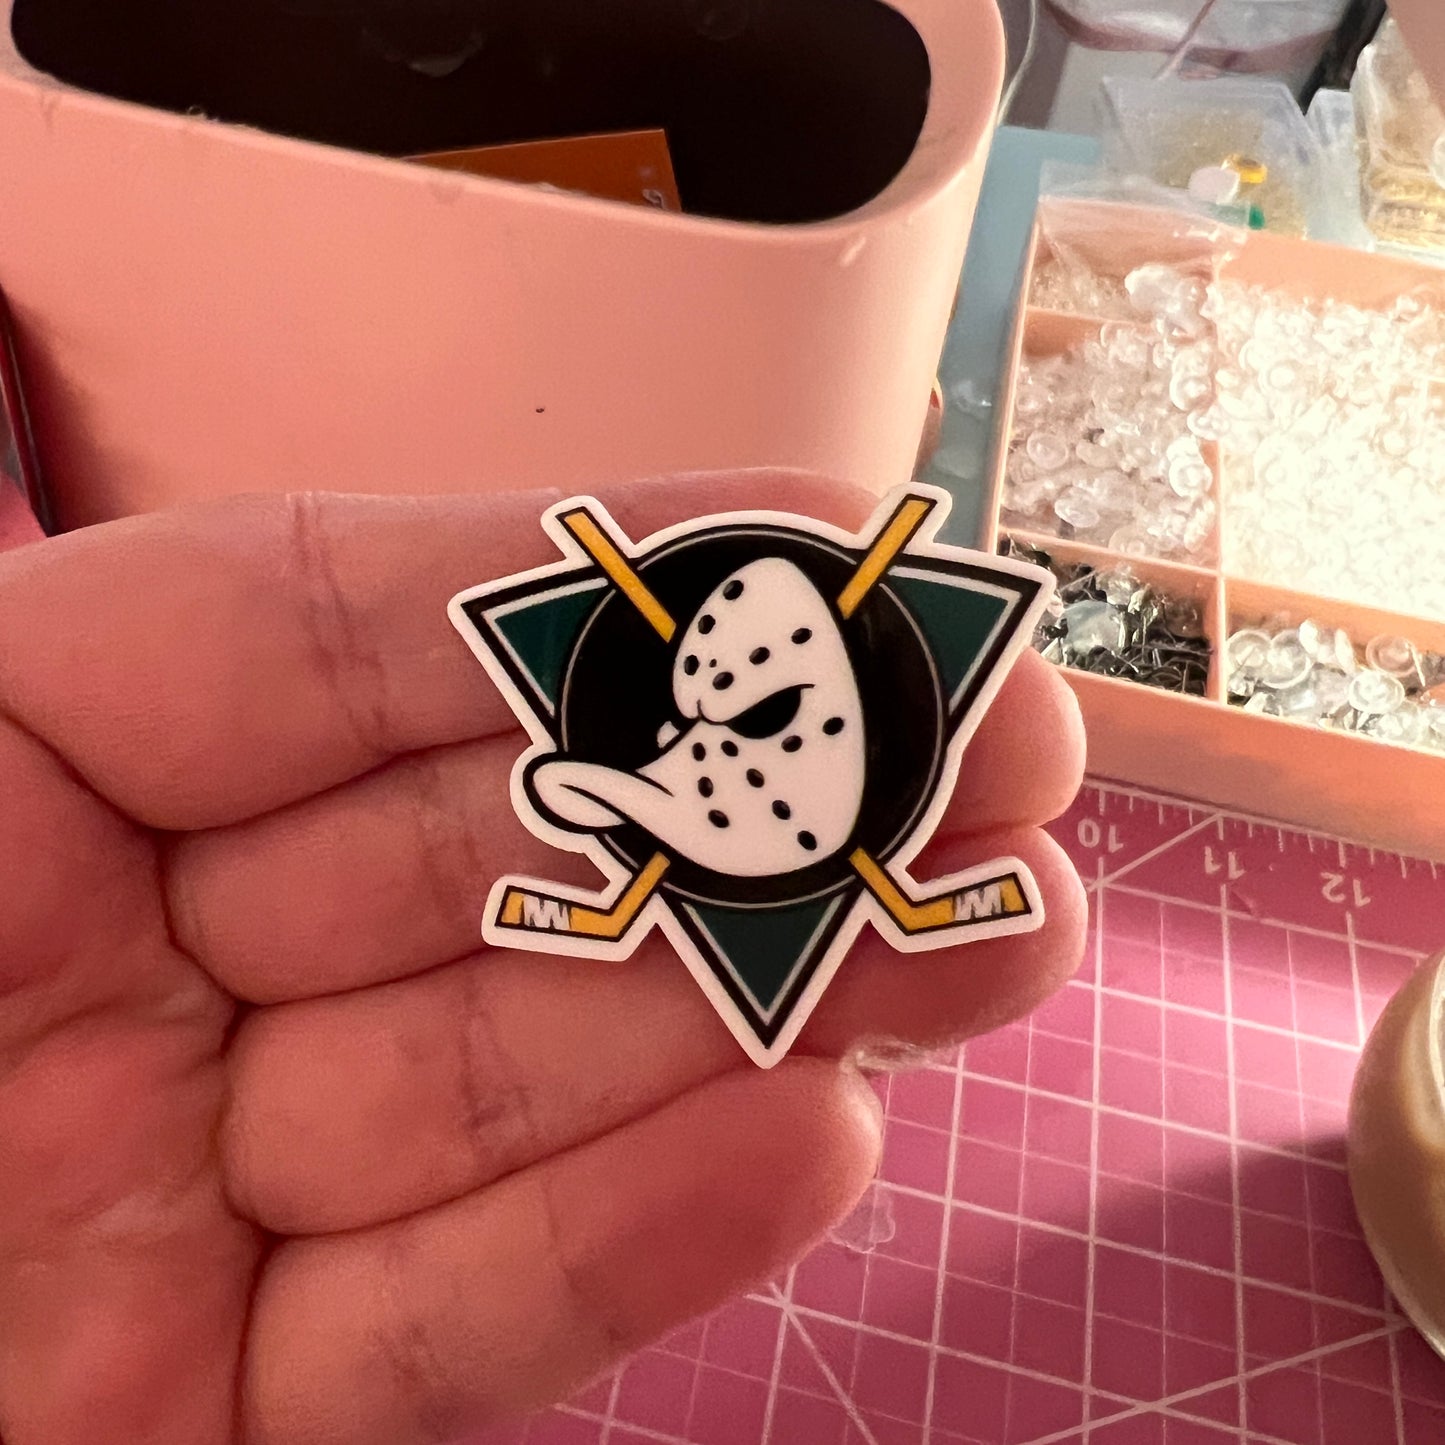 Mighty ducks drop earrings with post